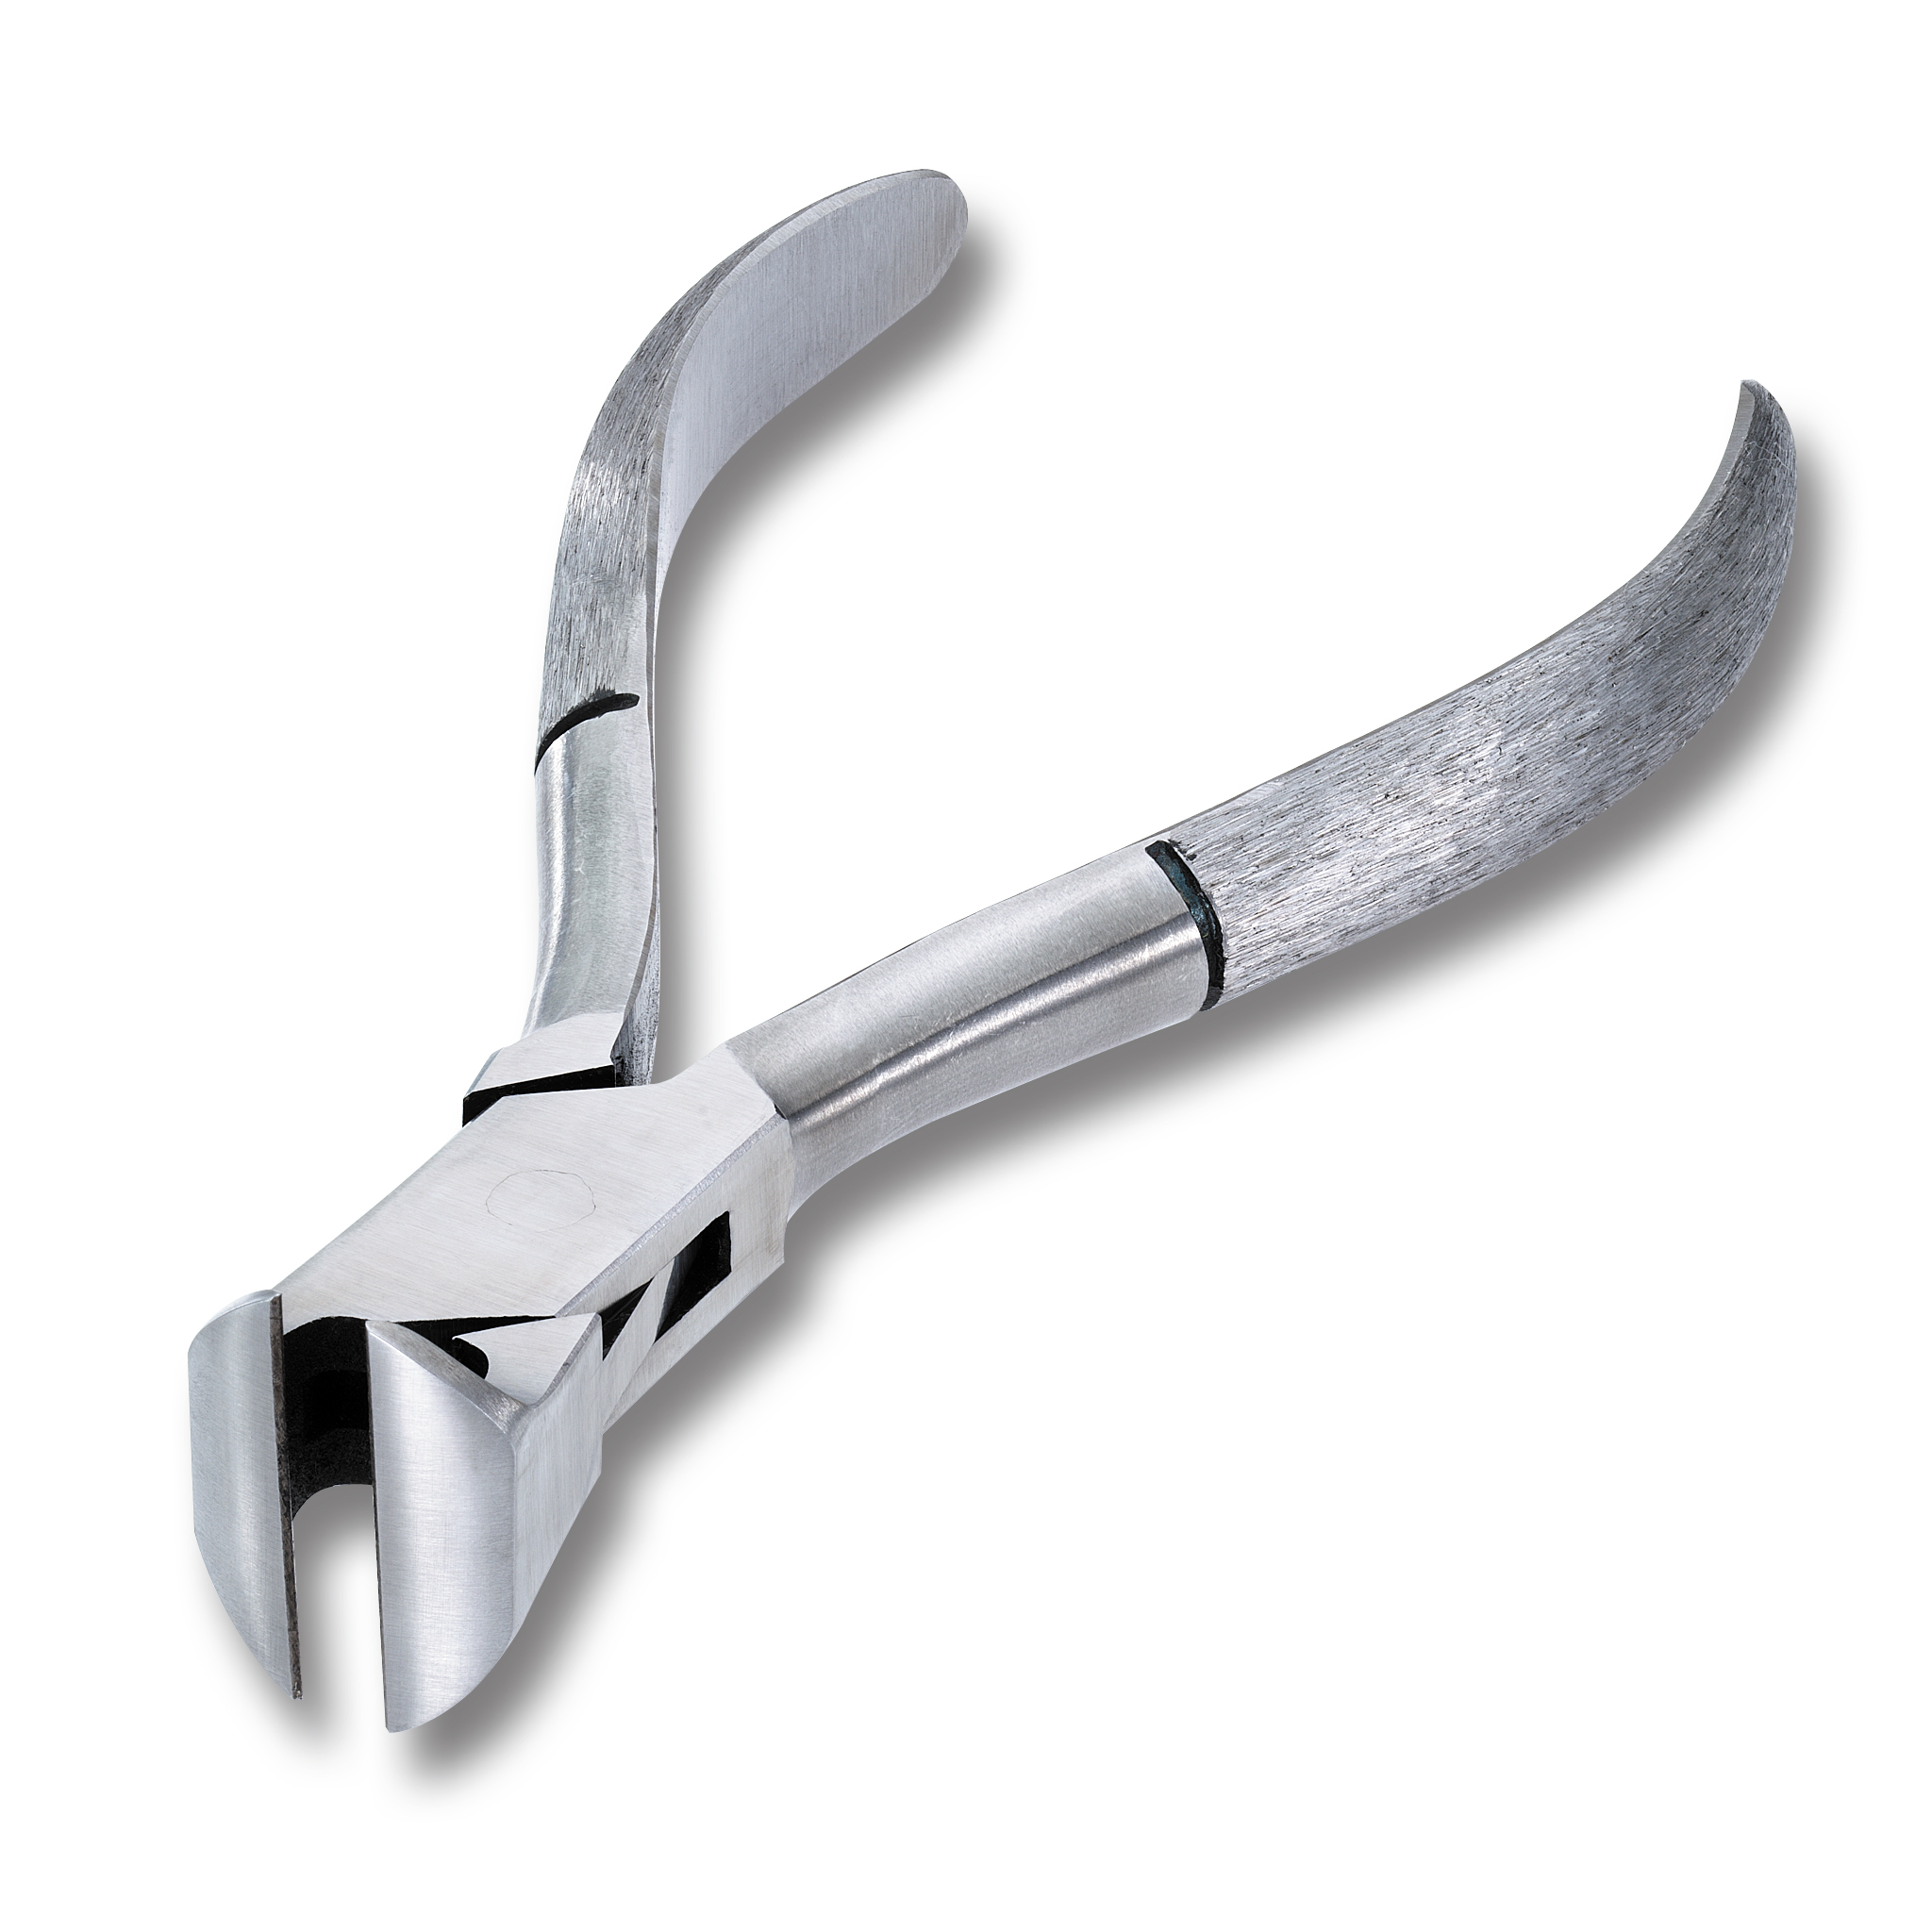 Super grip pincers with bevel with box joint.